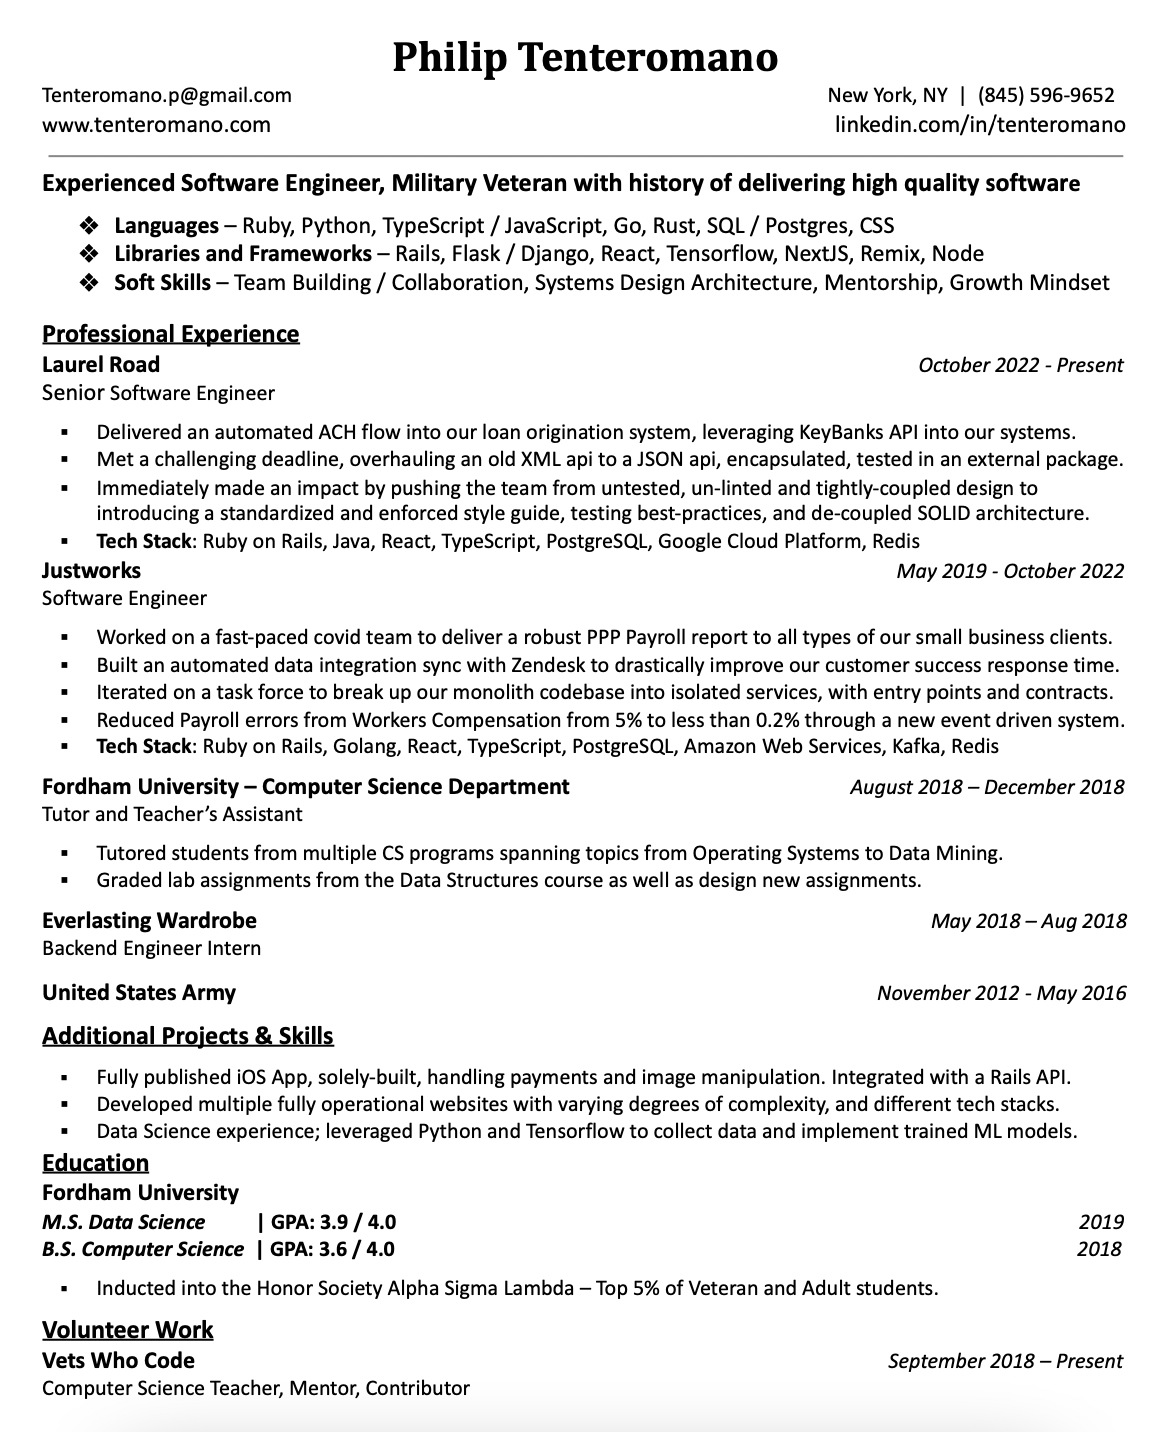 Phil Tenteromano's Resume for Software Engineer